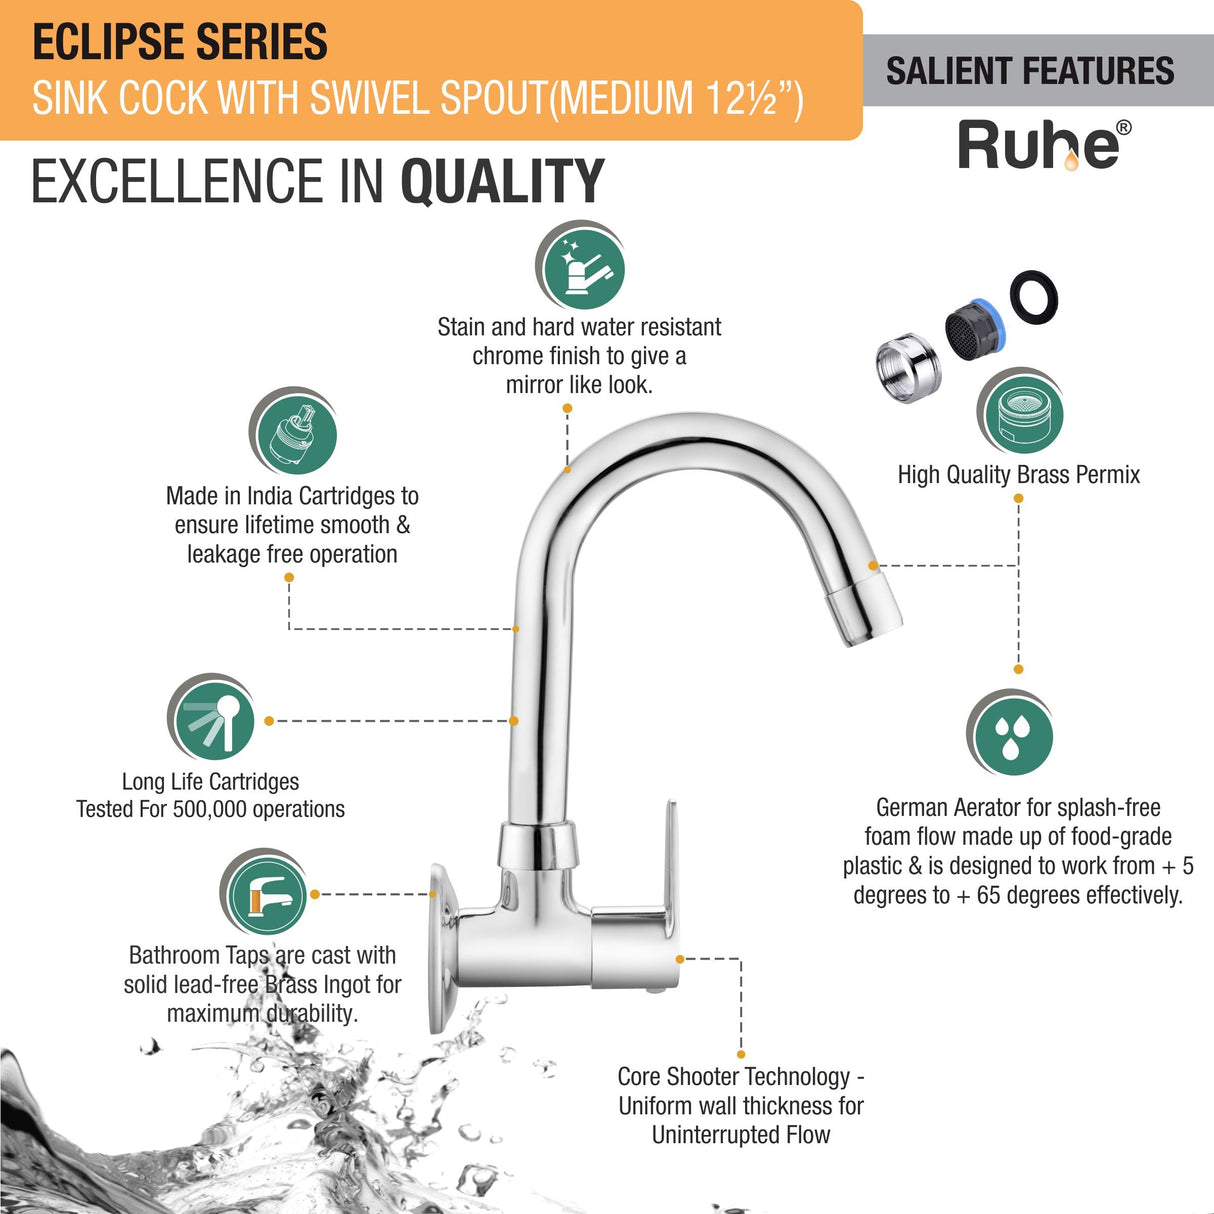 Eclipse Sink Tap with Medium (15 inches) Round Swivel Spout Faucet feature